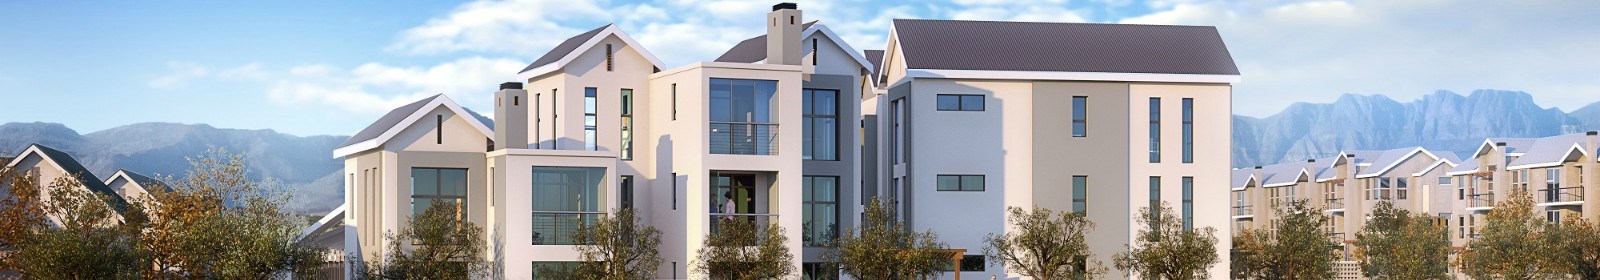 New apartments launch at Sitari Country Estate, Somerset West